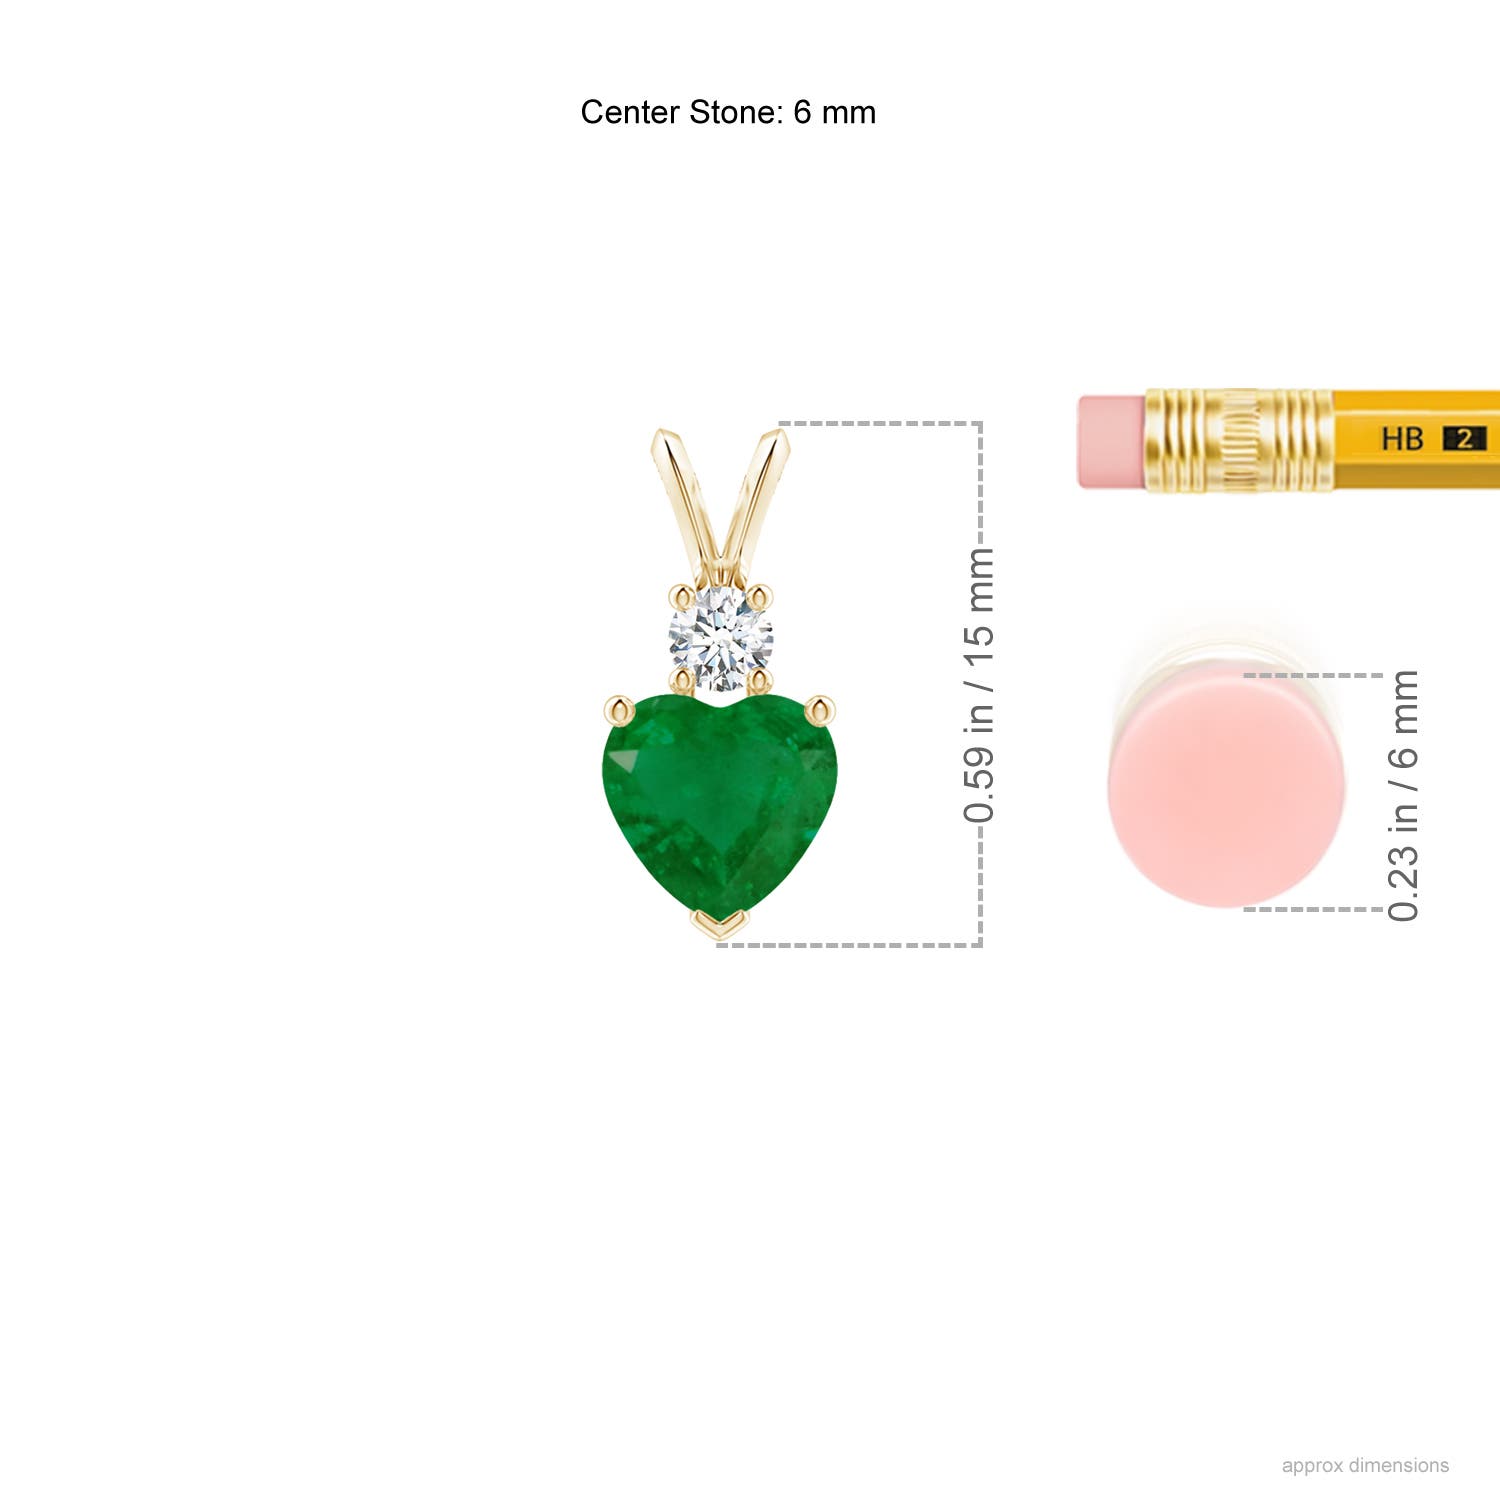 A - Emerald / 0.68 CT / 14 KT Yellow Gold